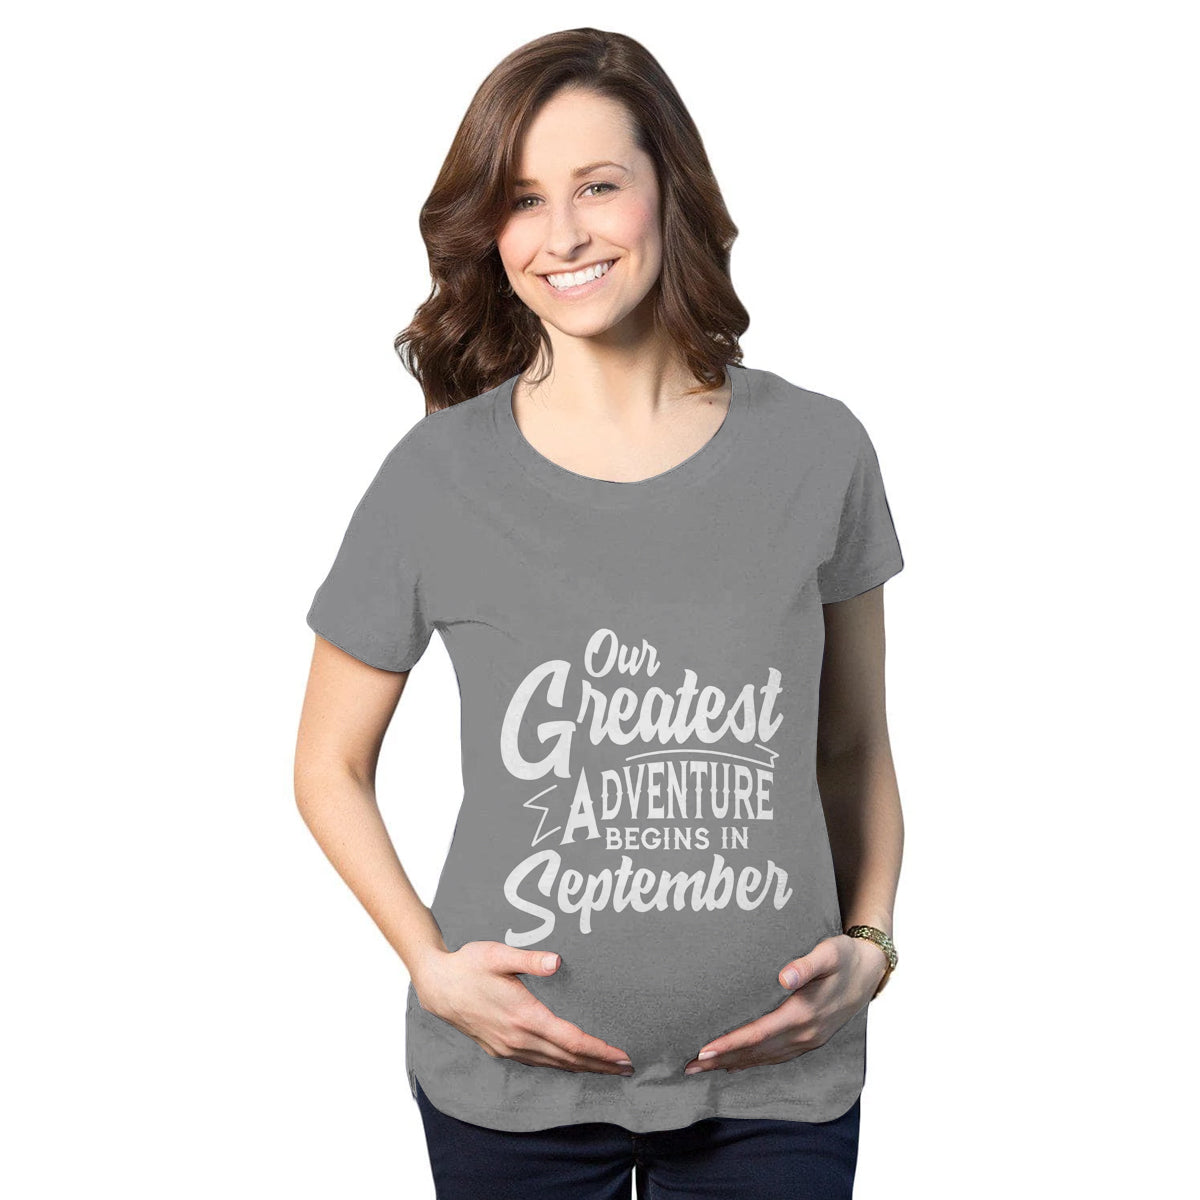 Our Greatest Adventure Begins in September Maternity T-Shirt